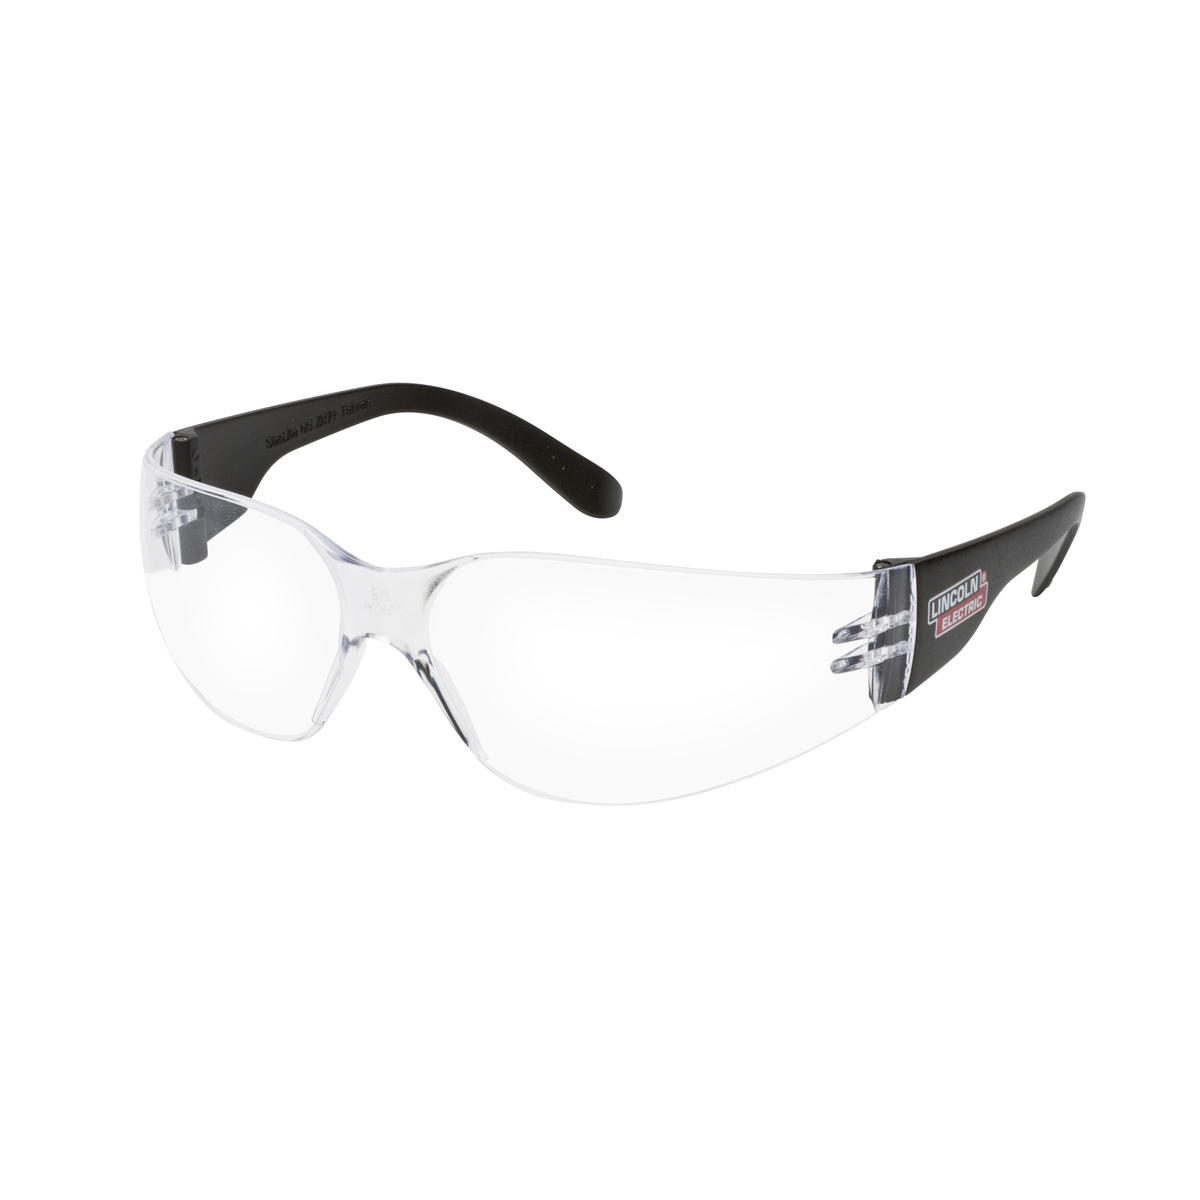 Lincoln Electric® Starlite® Welding Safety Glasses With Black Frame And Clear Polycarbonate Anti-Fog Lens